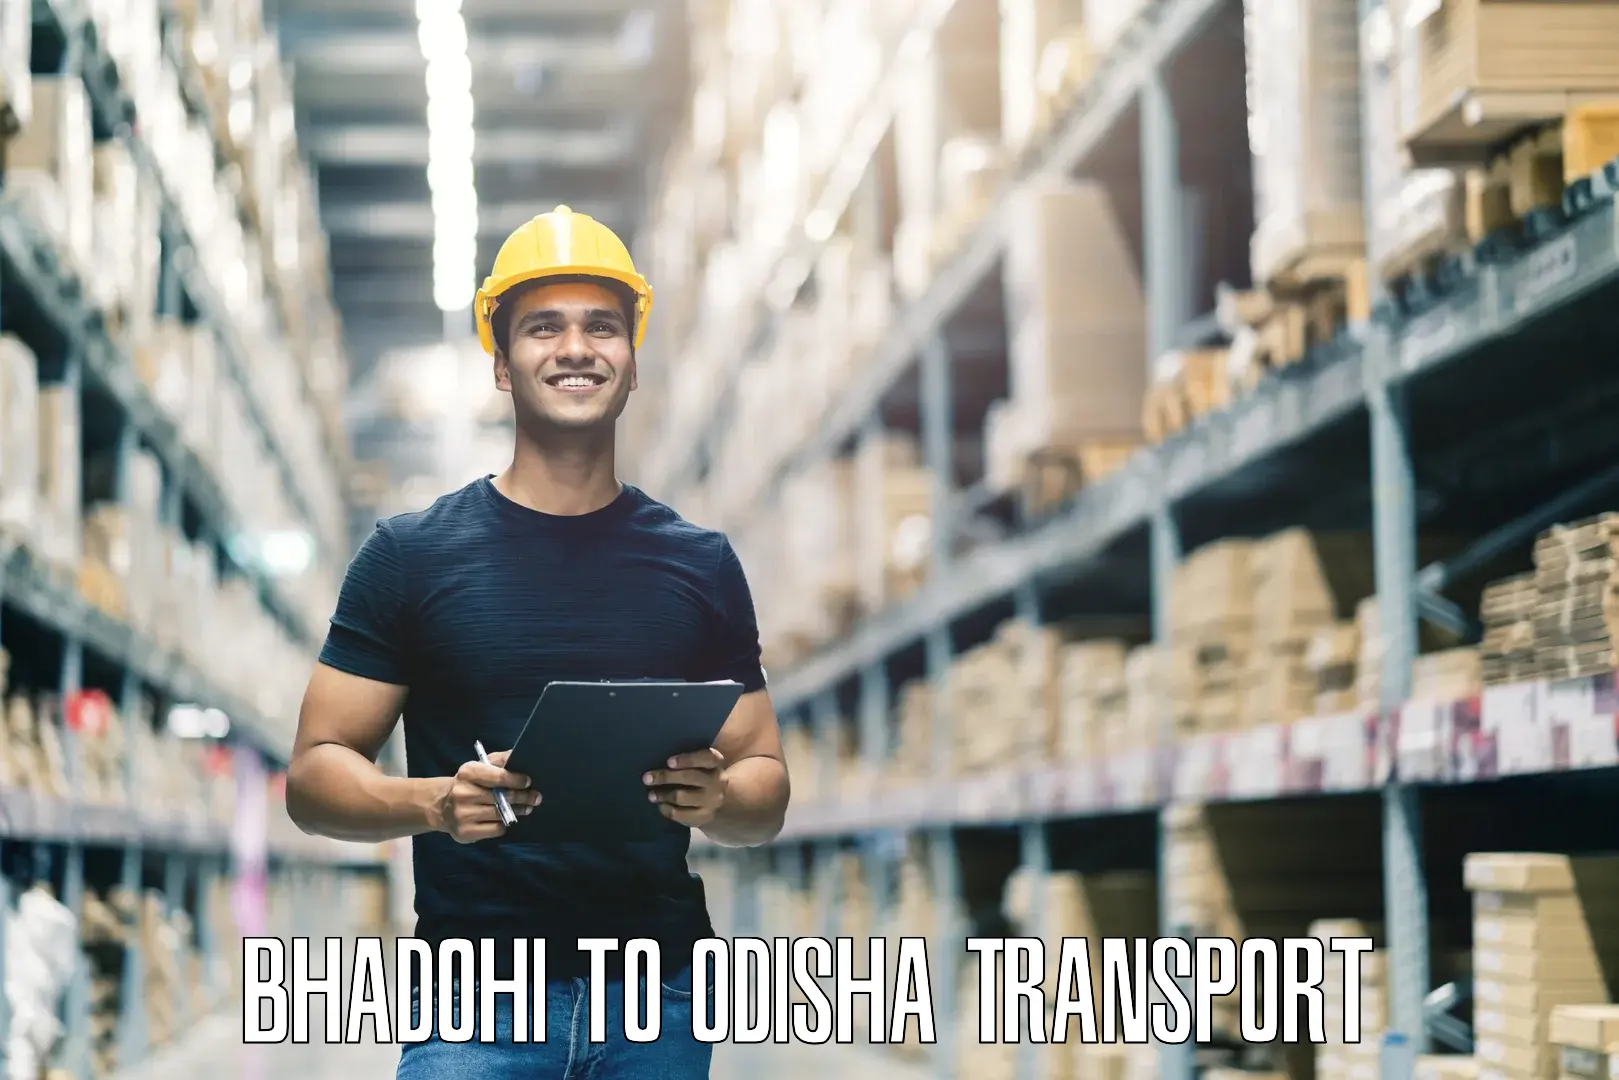 Goods delivery service Bhadohi to Bhubaneswar